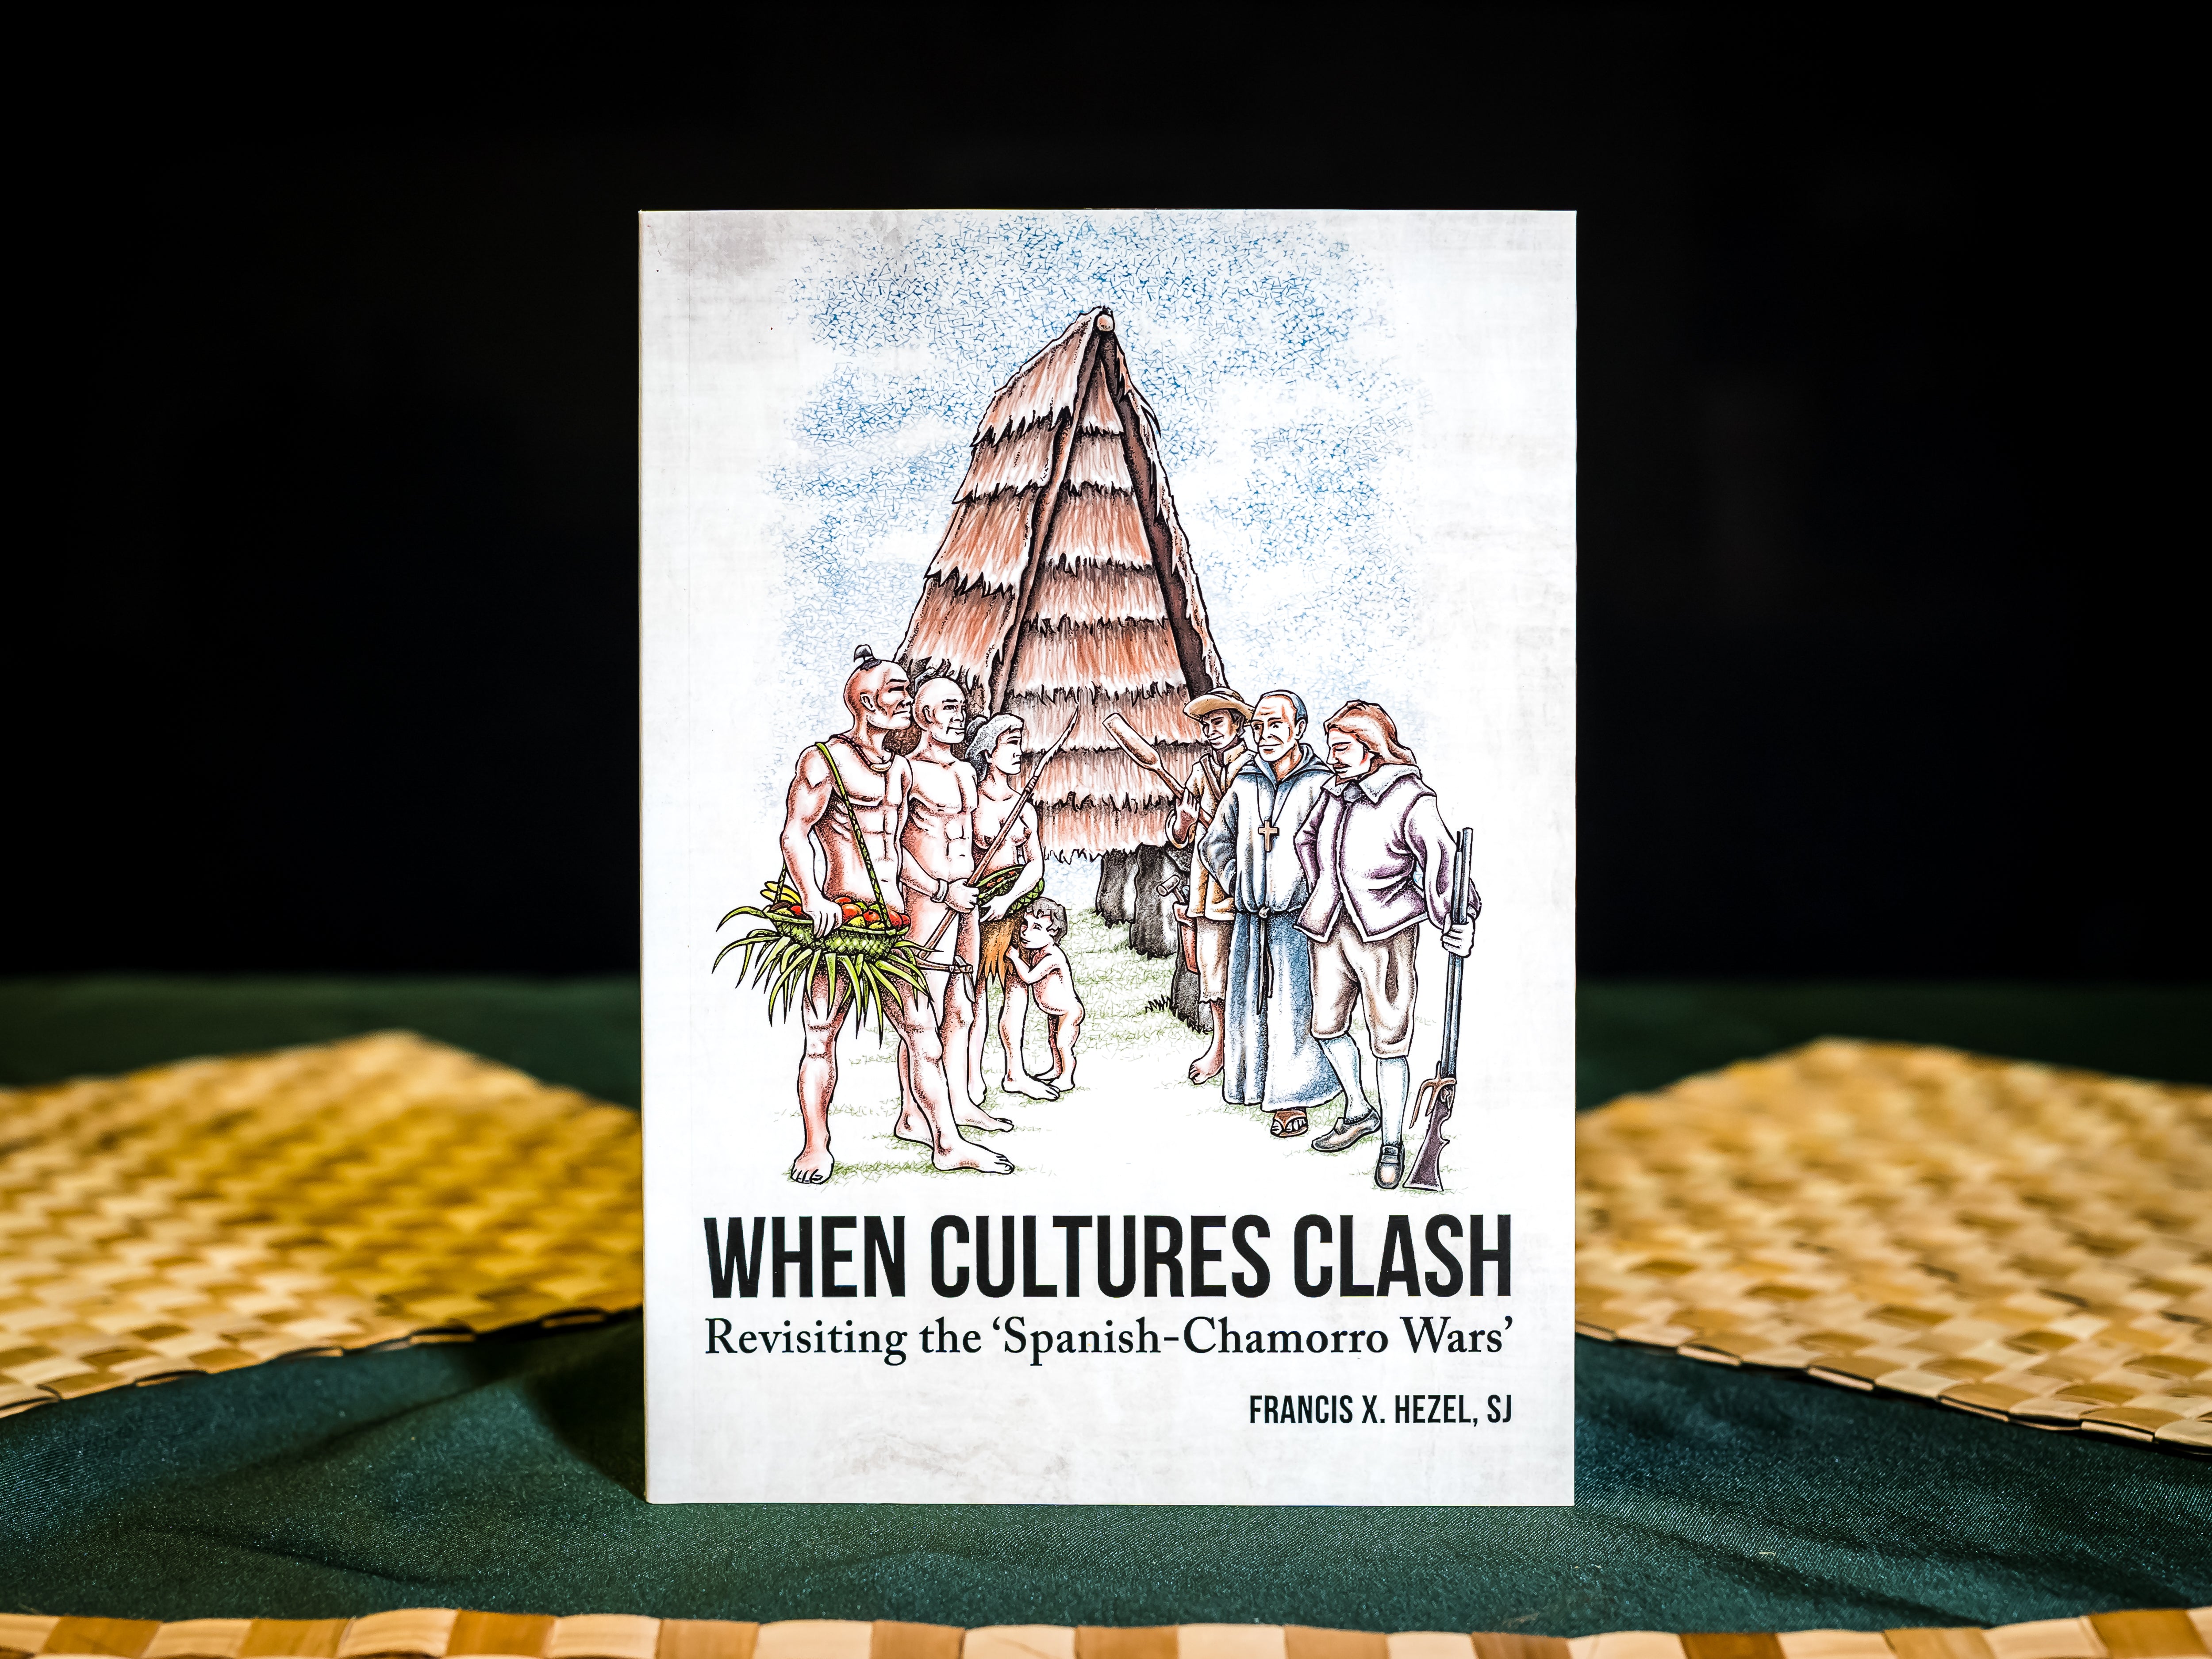 When Cultures Clash: Revisiting the 'Spanish-Chamorro Wars'